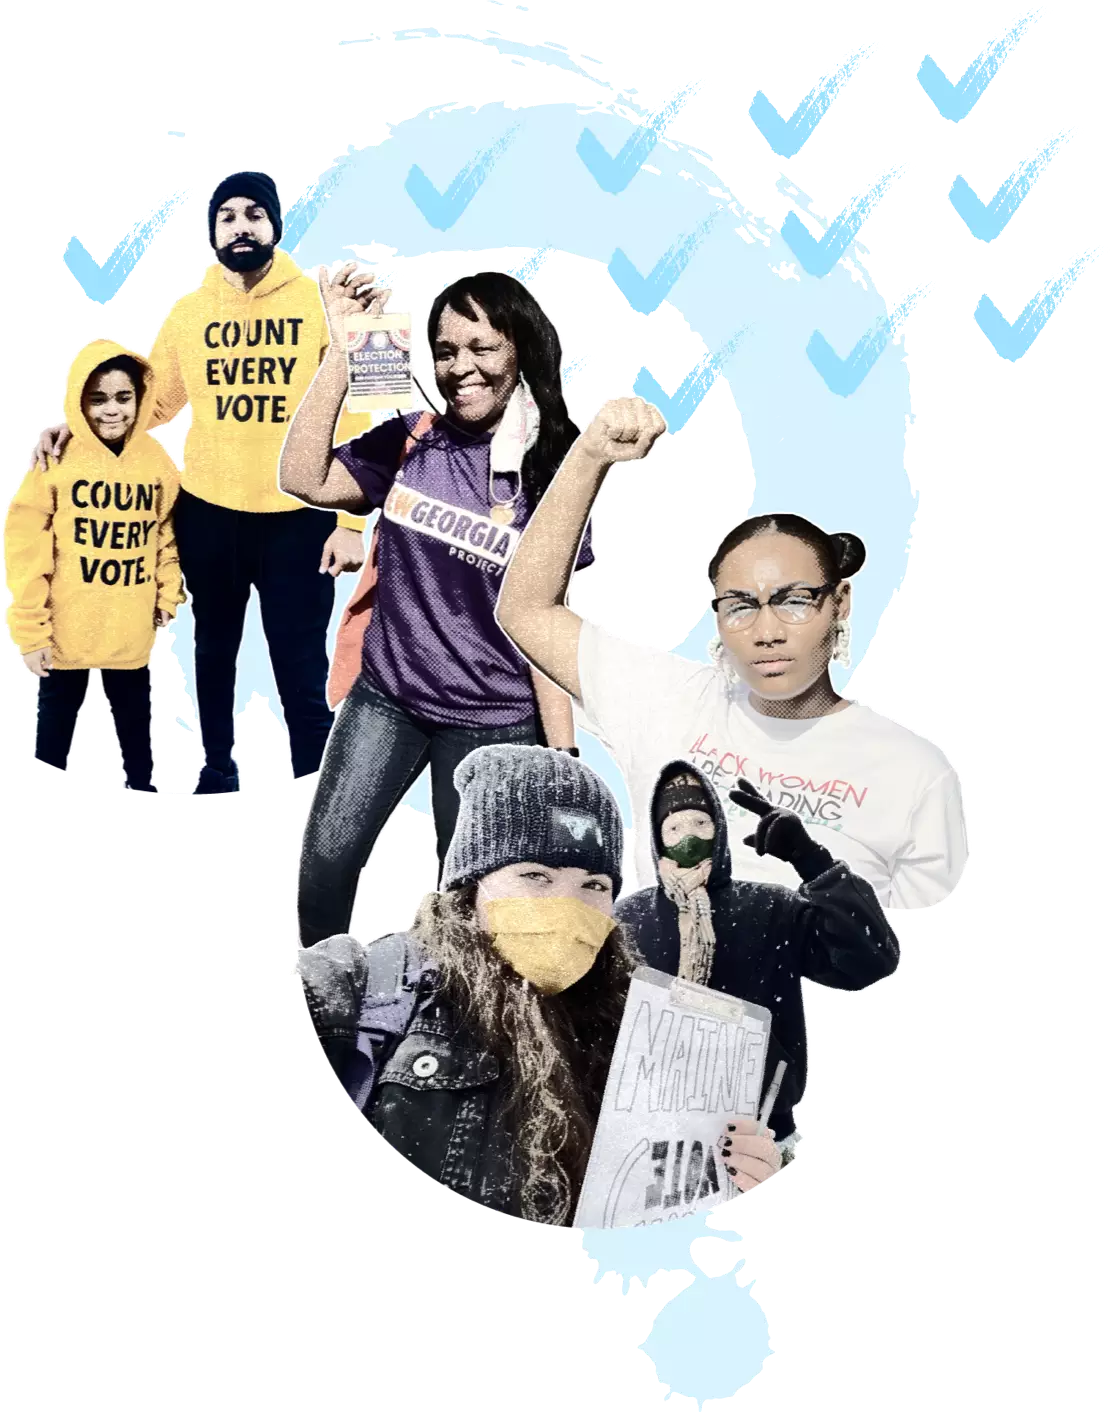 Collage of activists